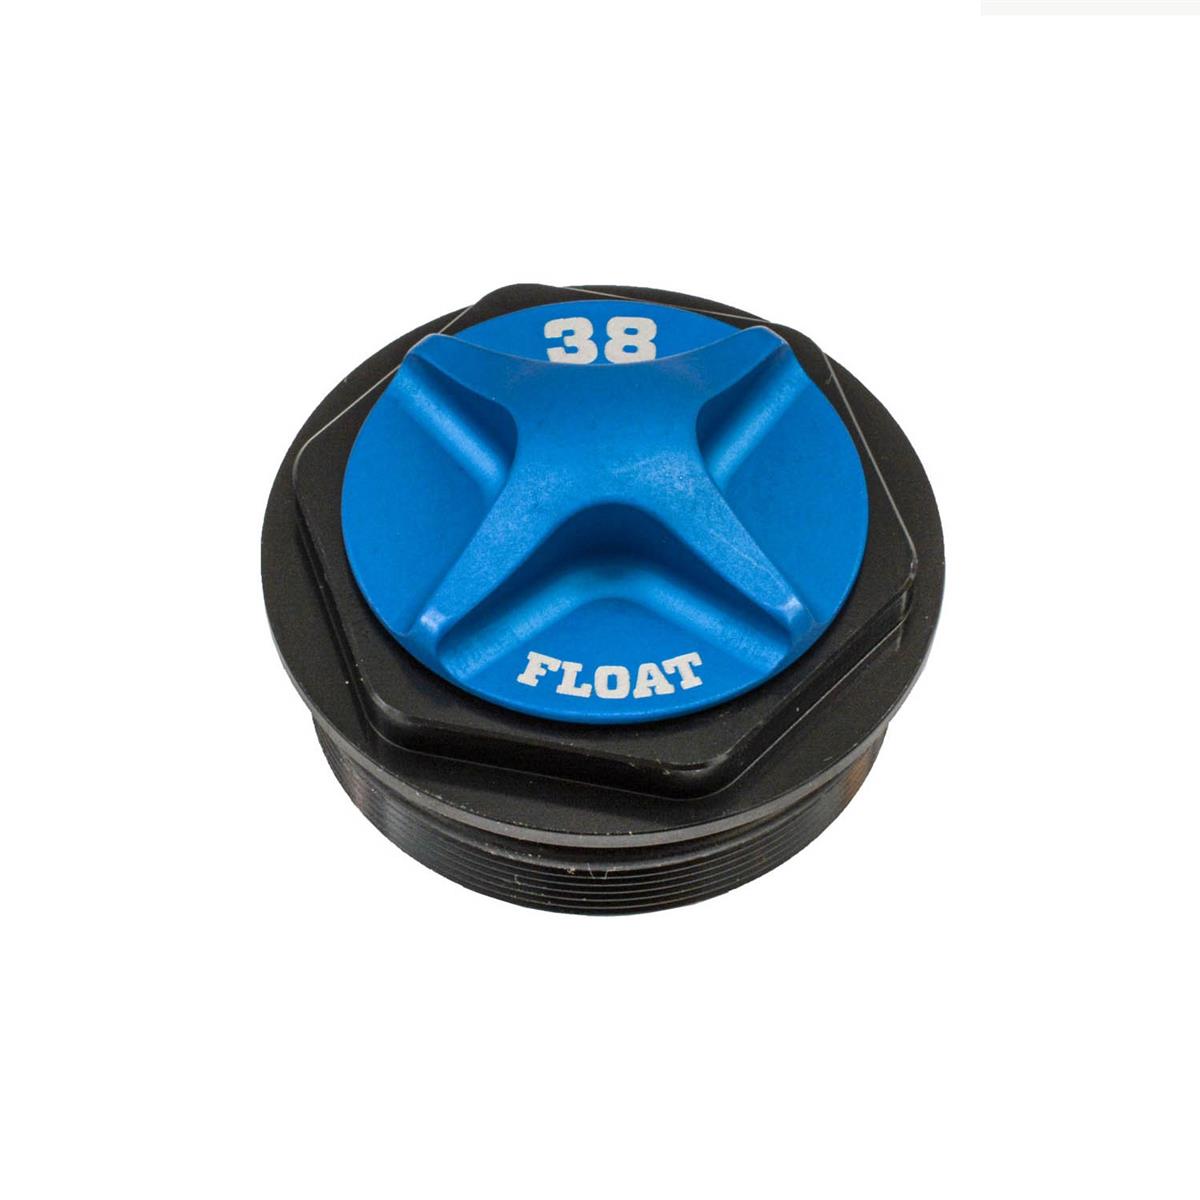 38 Float NA2 Topcap Assy with Air Cap